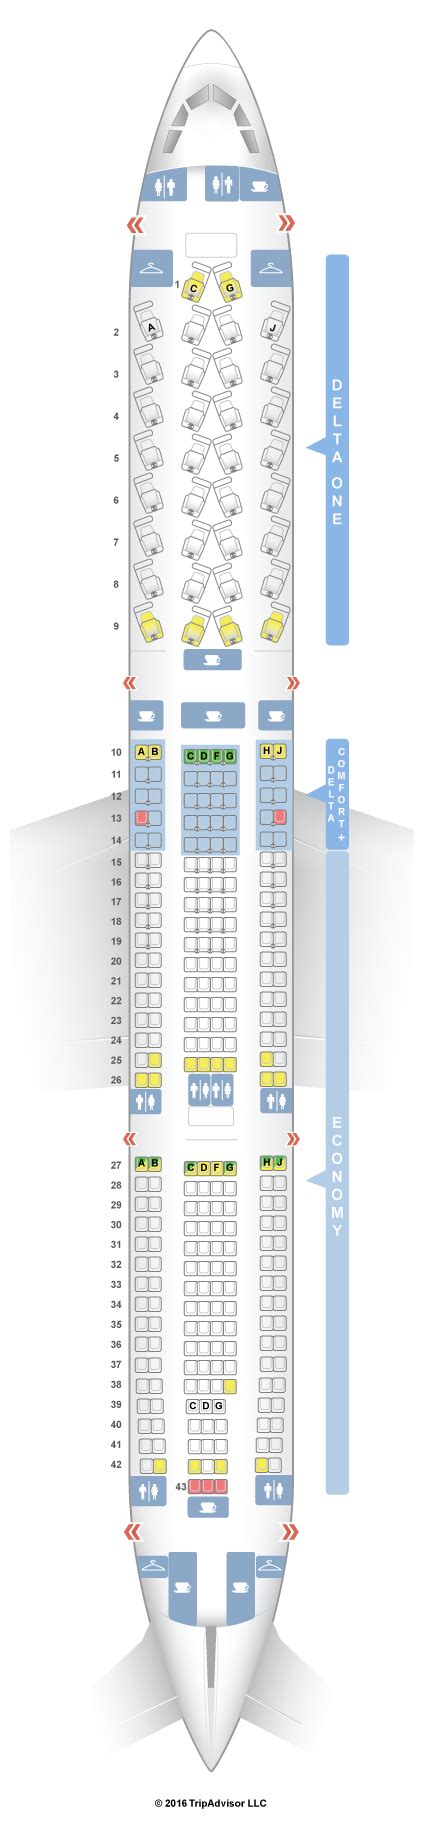 Delta Airbus A330 Jet Seating Chart My XXX Hot Girl